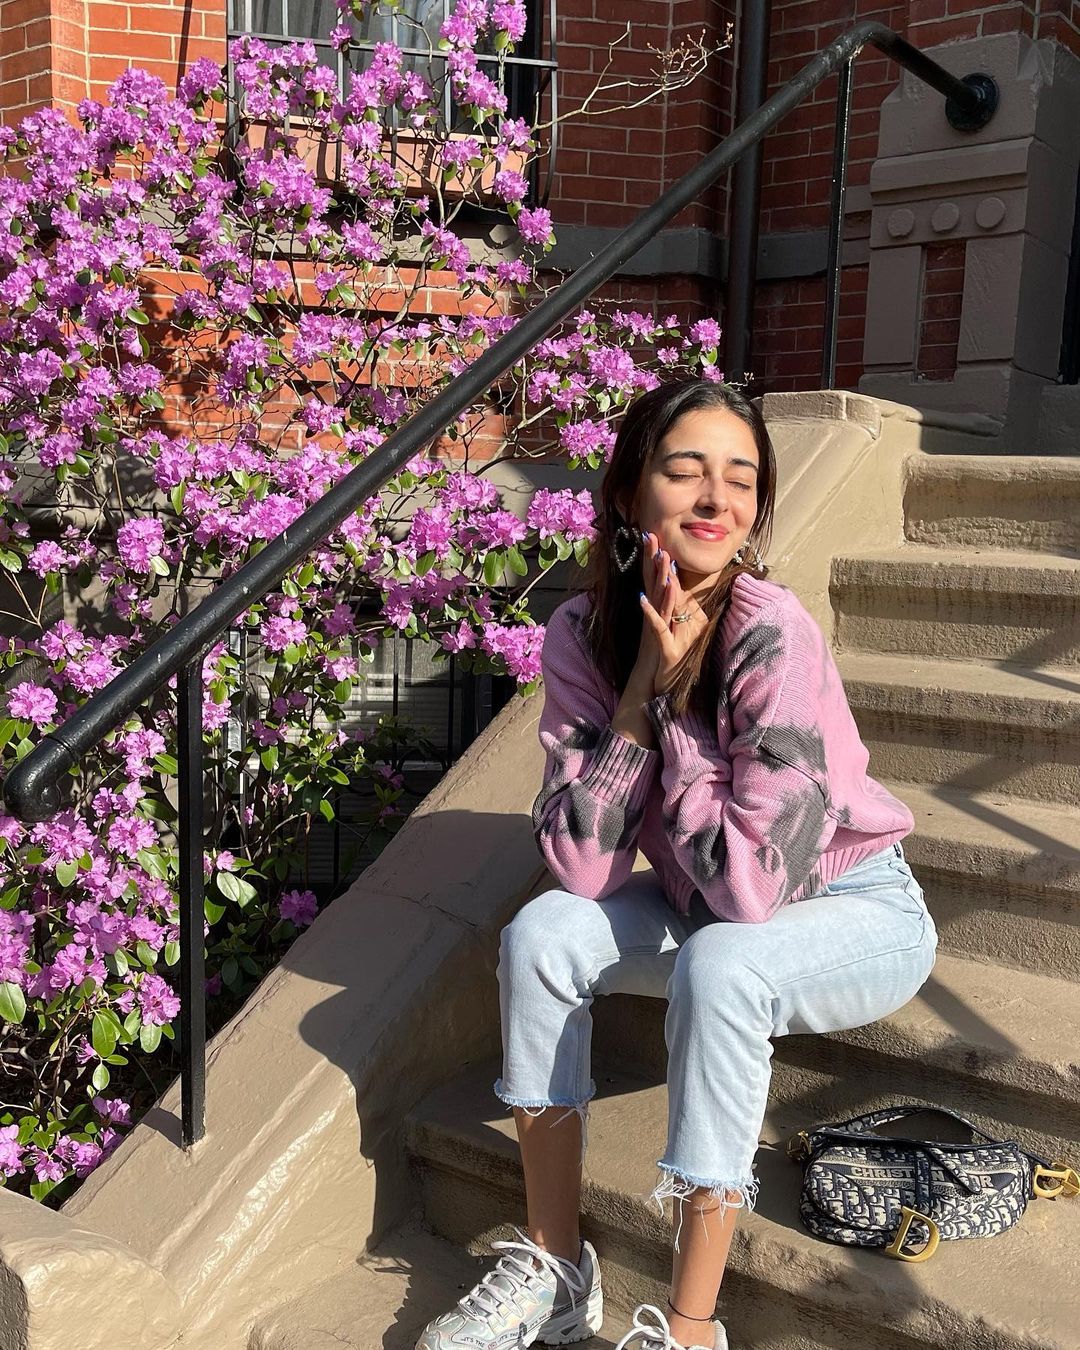 Ananya Panday pairs tie-dye sweatshirt with luxury Louis Vuitton tote worth  Rs. 1.97 lakhs 1 : Bollywood News - Bollywood Hungama